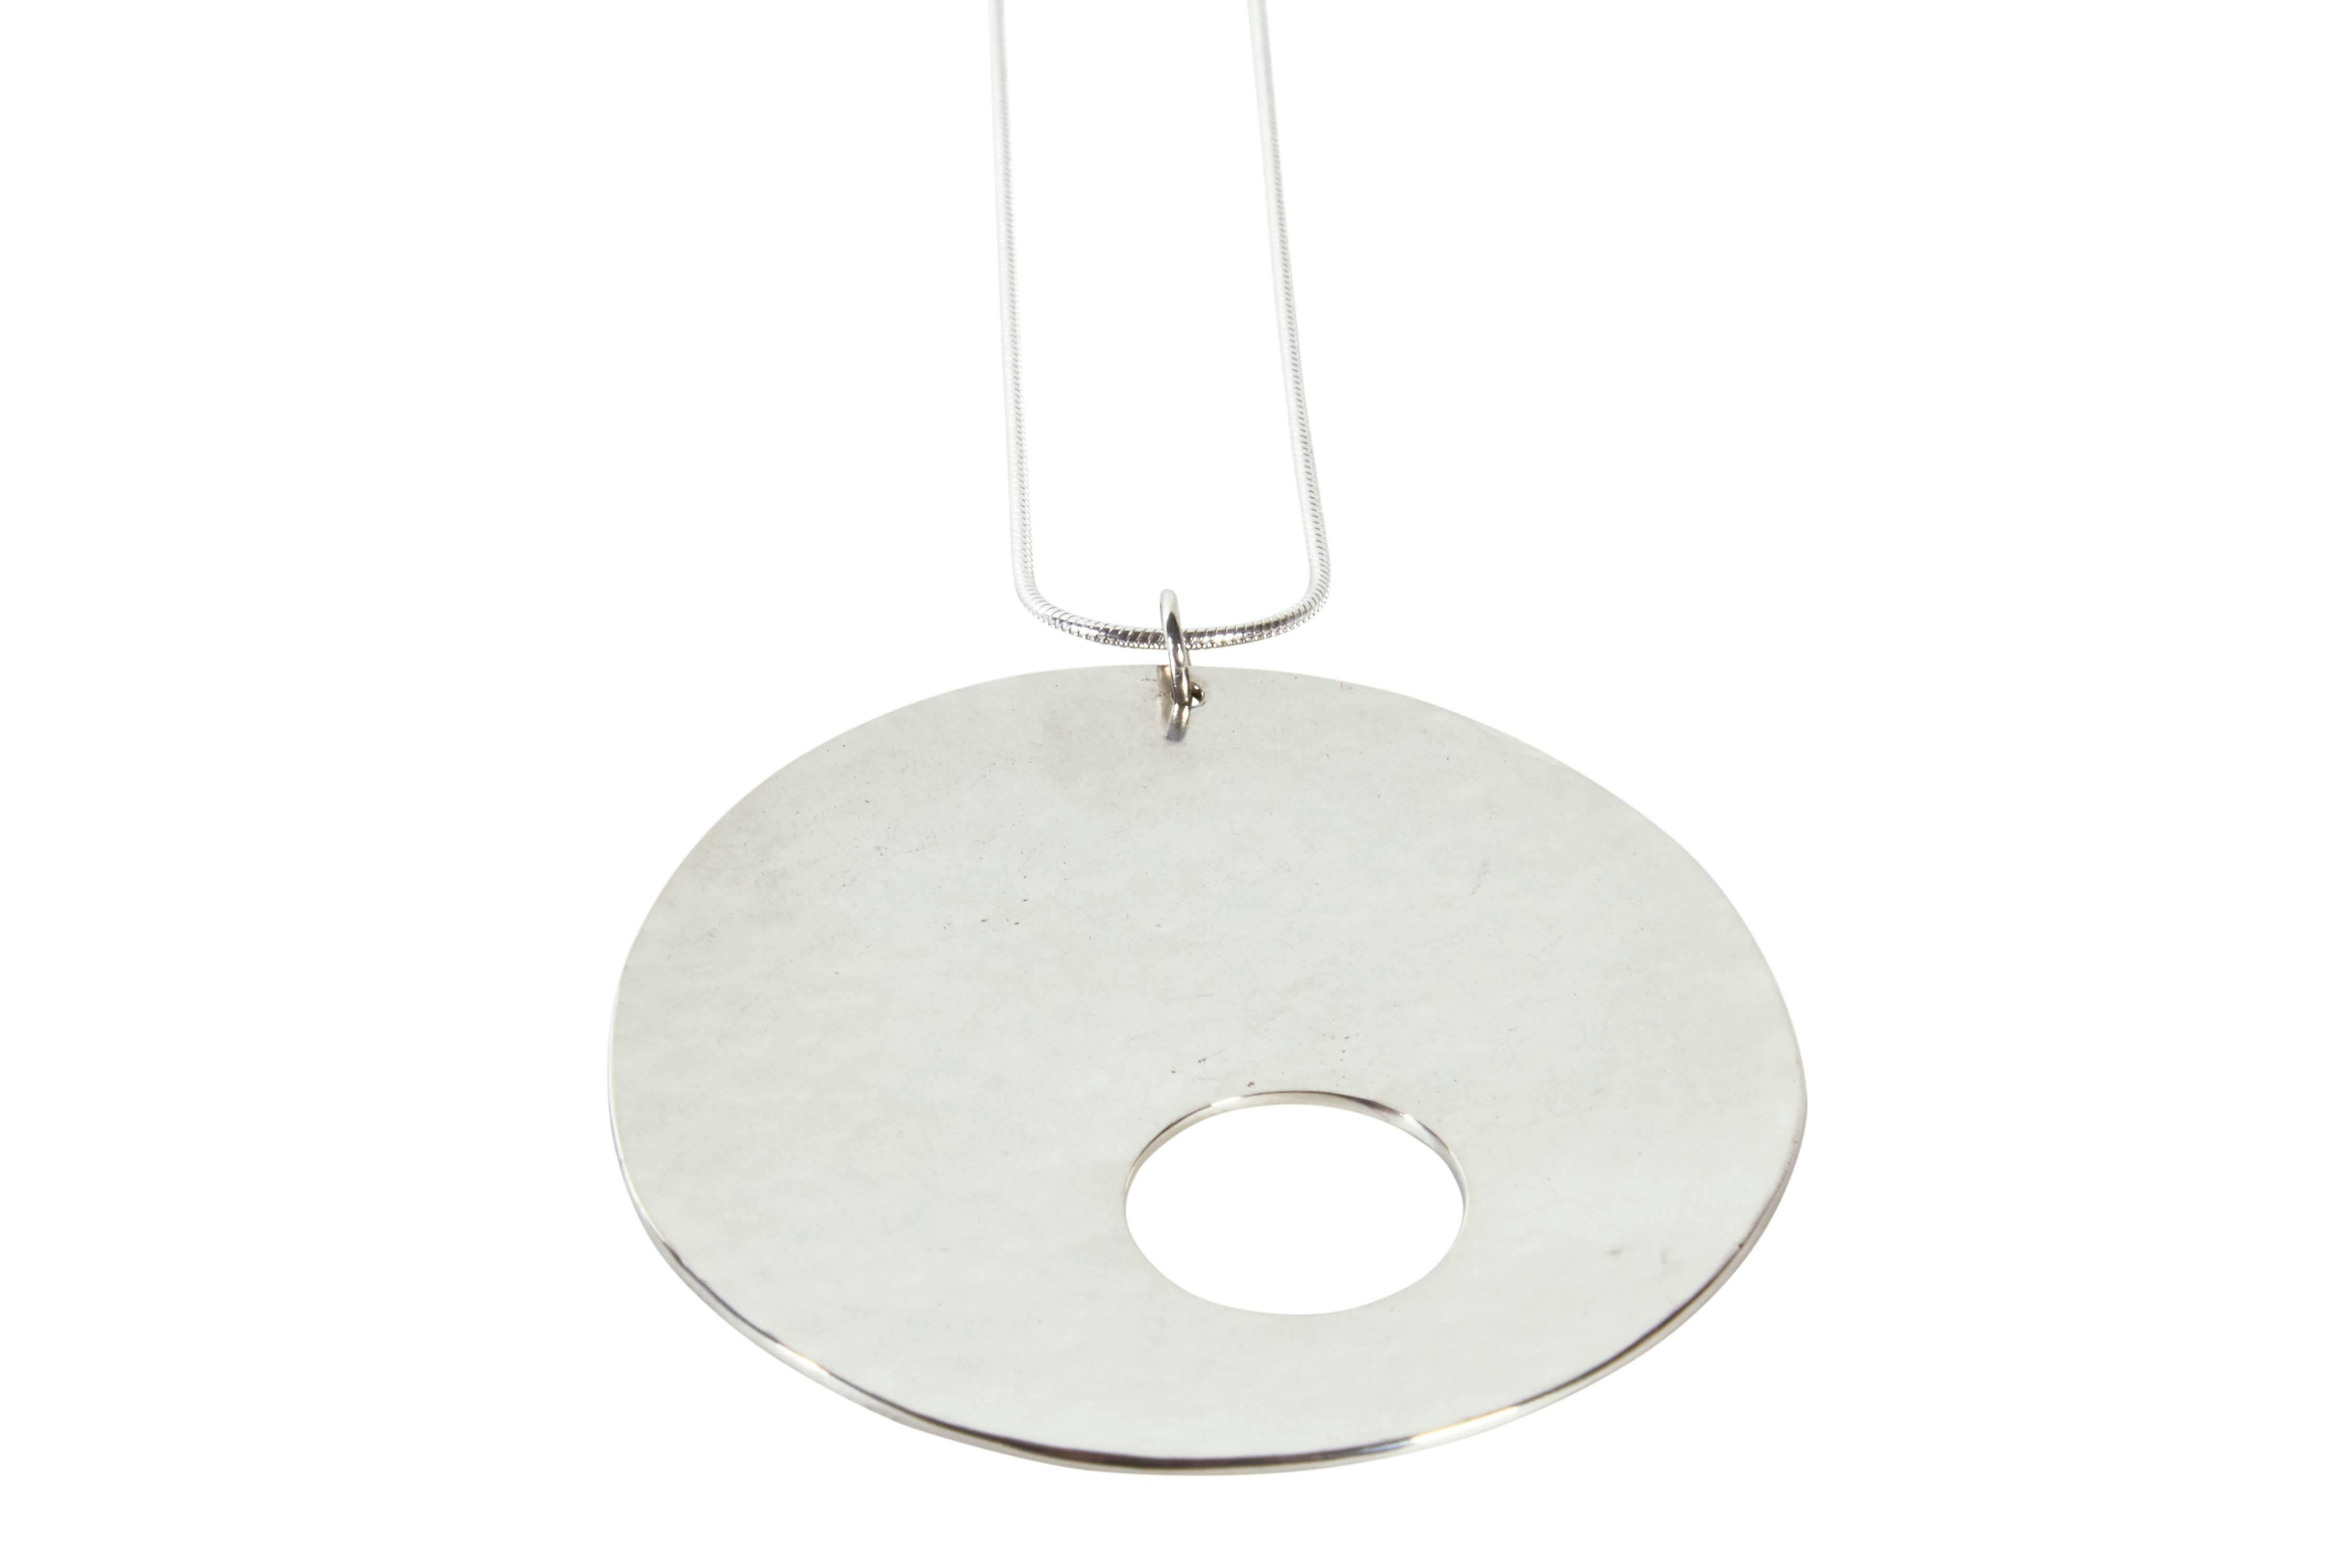 American Limited Edition Sterling Silver Gong Style Pendant Designed by Harry Bertoia